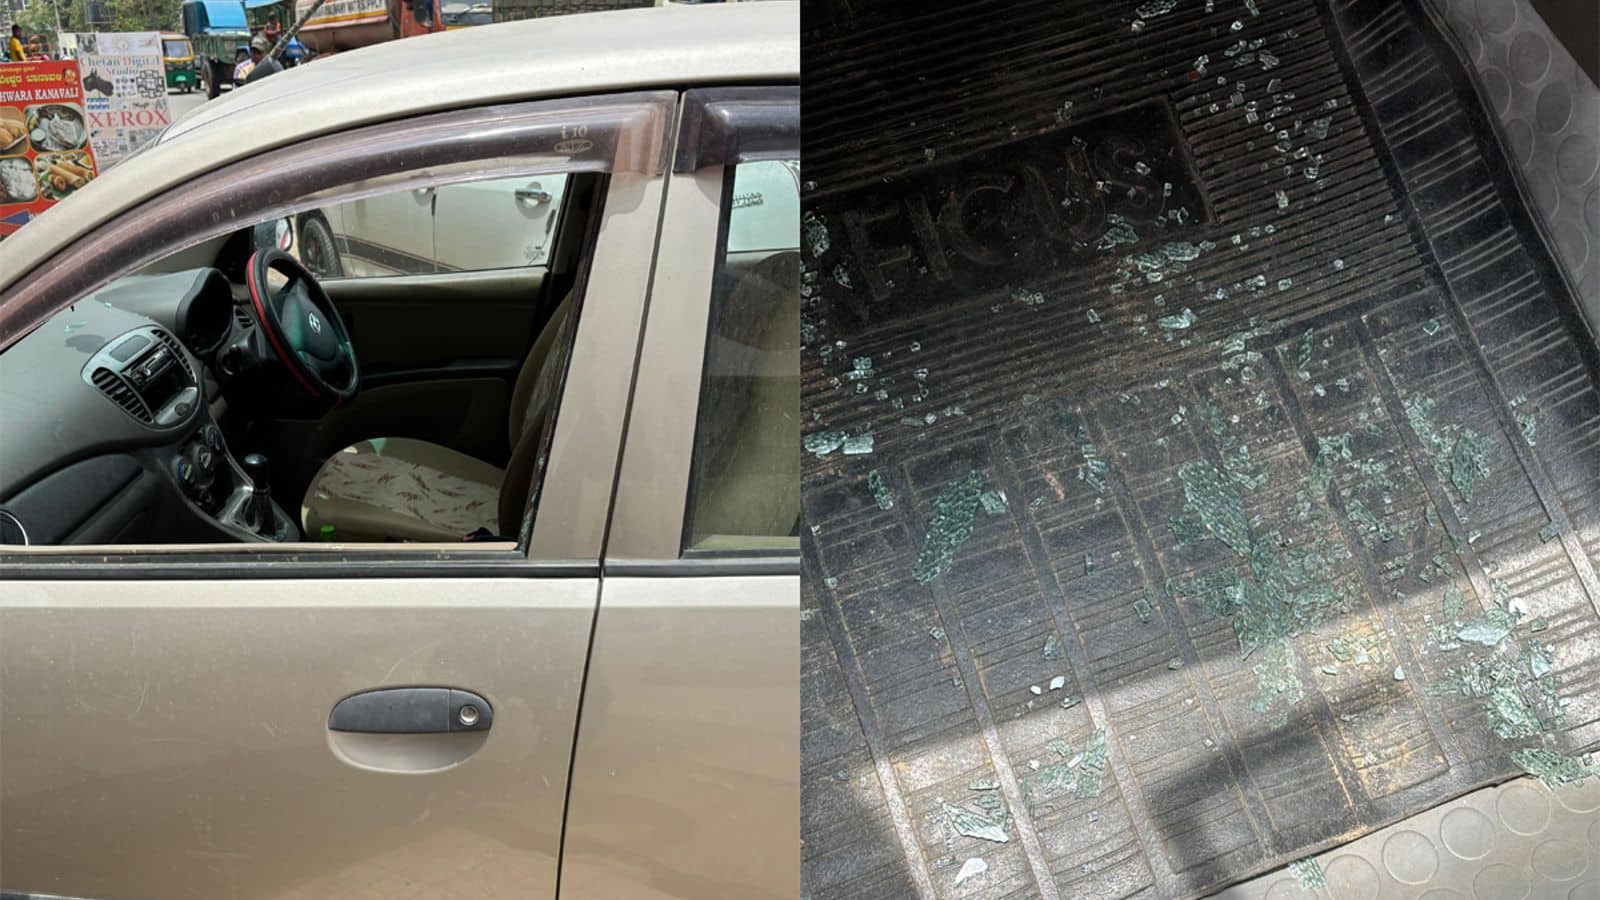 Bengaluru scooterist shatters car window with child inside 